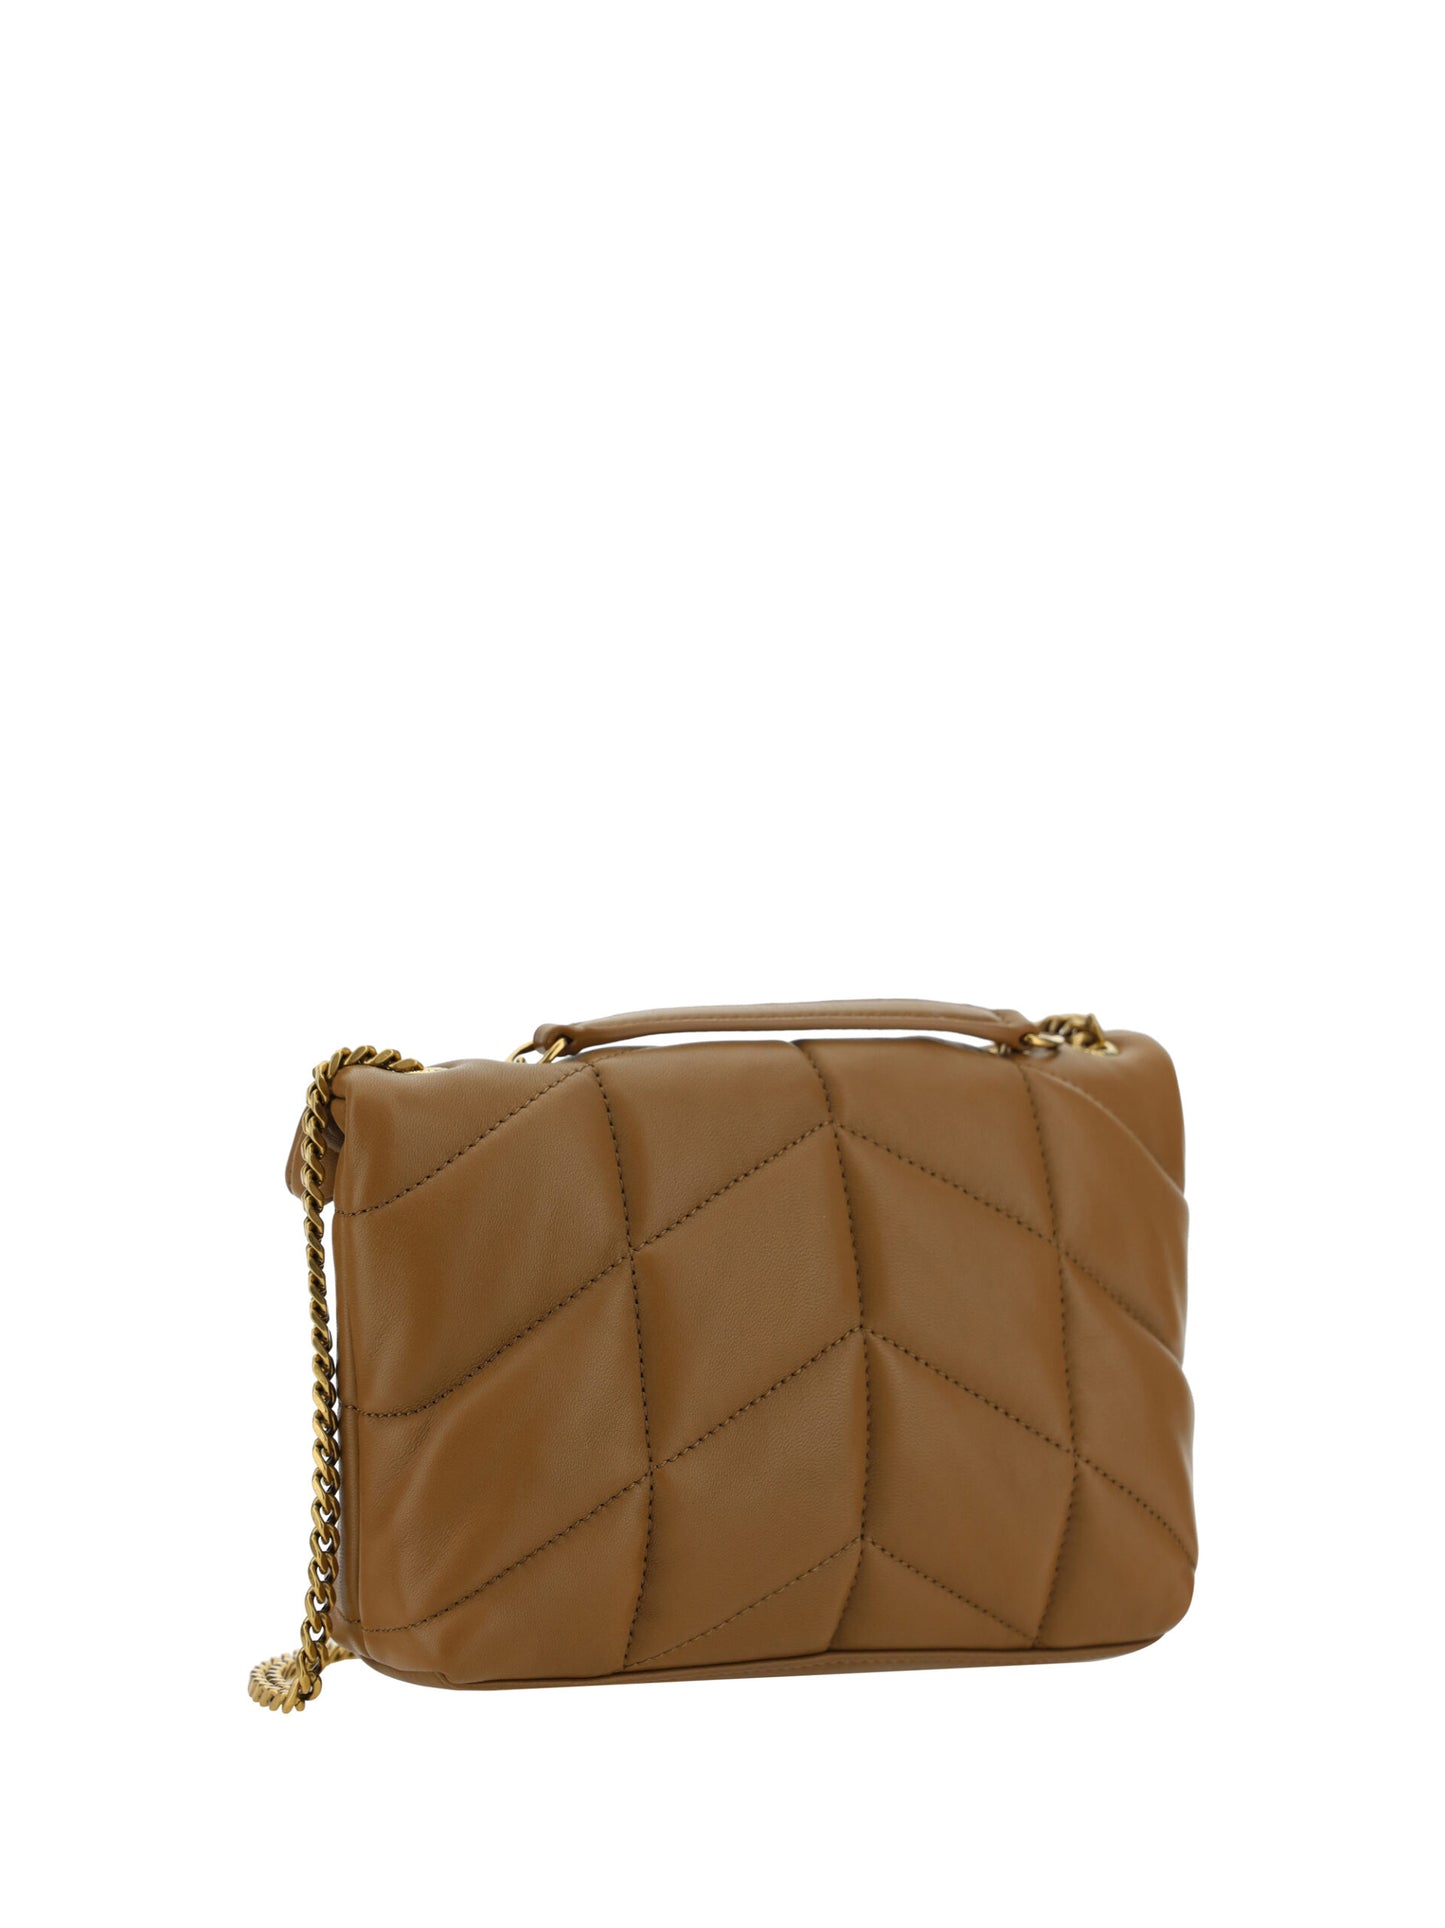 Saint Laurent Brown Puffer Toy Quilted Leather Shoulder Bag